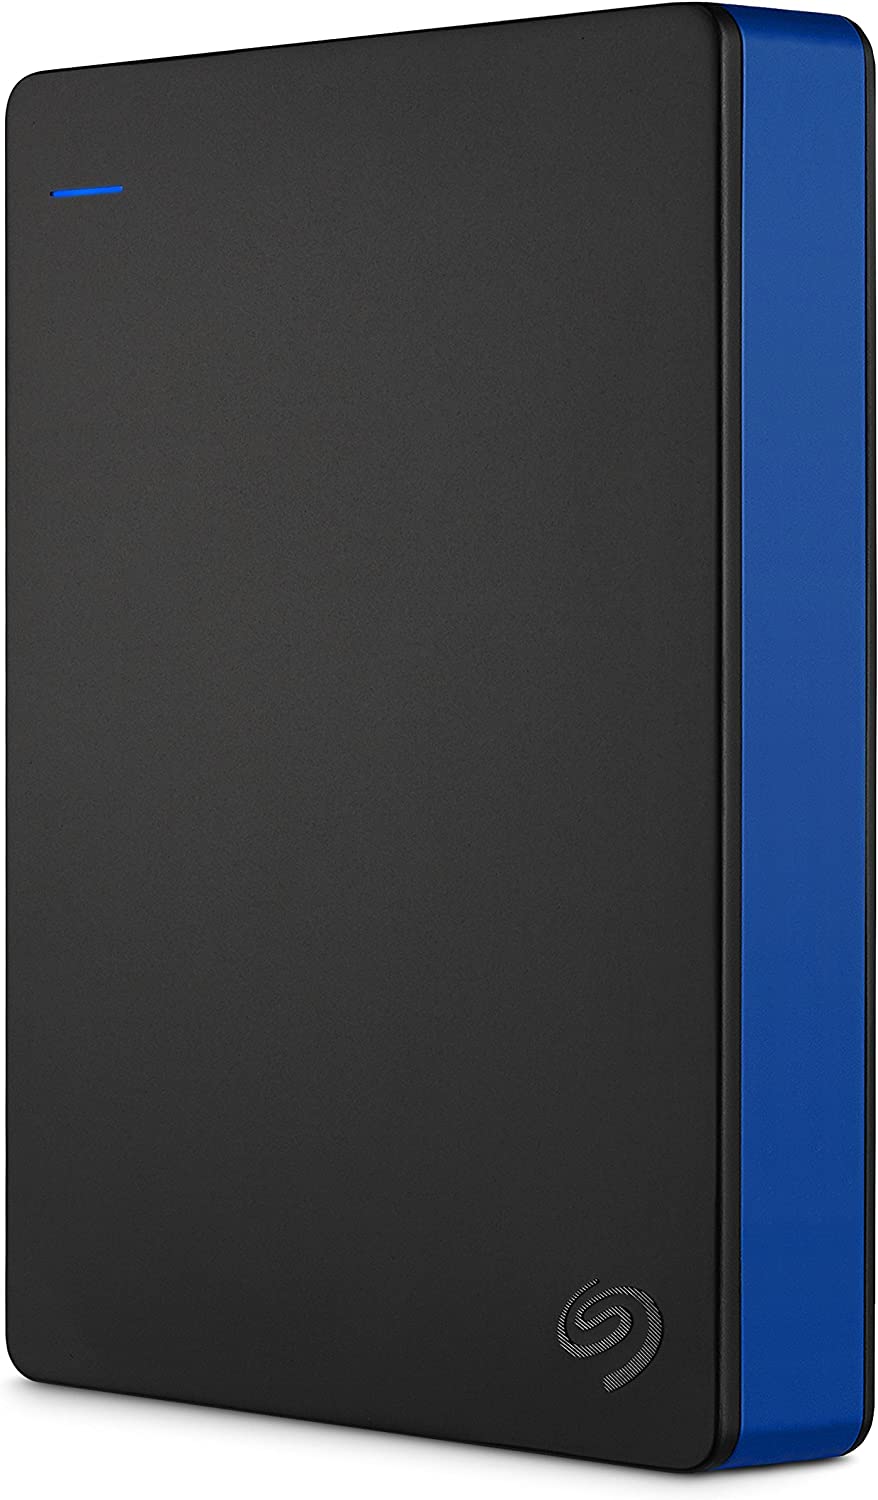 Disque Dur Externe PS5 1To, 4To, 5To, 8To